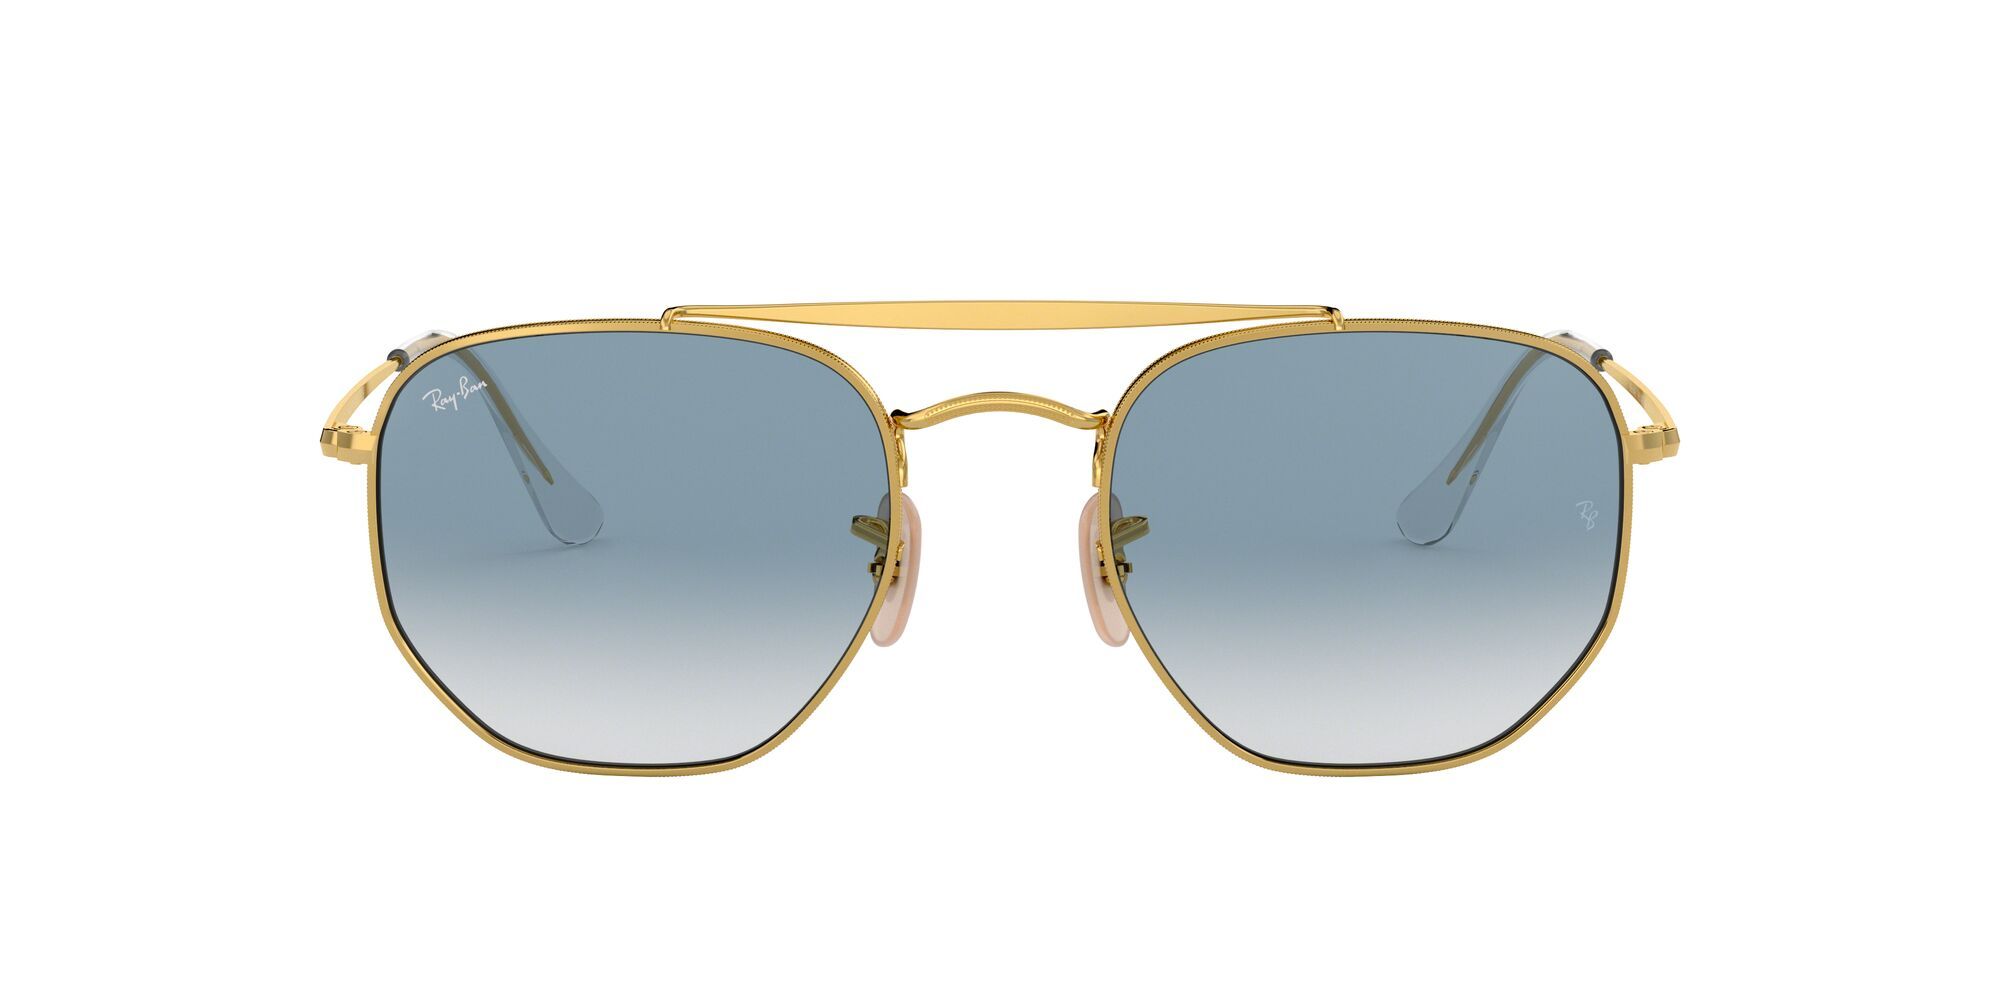 George Eliot avond Prestatie Ray-Ban 0RB3648 Light Blue Anti-Reflective The Marshal Beveled Sunglasses  (54 mm): Buy Ray-Ban 0RB3648 Light Blue Anti-Reflective The Marshal Beveled  Sunglasses (54 mm) Online at Best Price in India | Nykaa